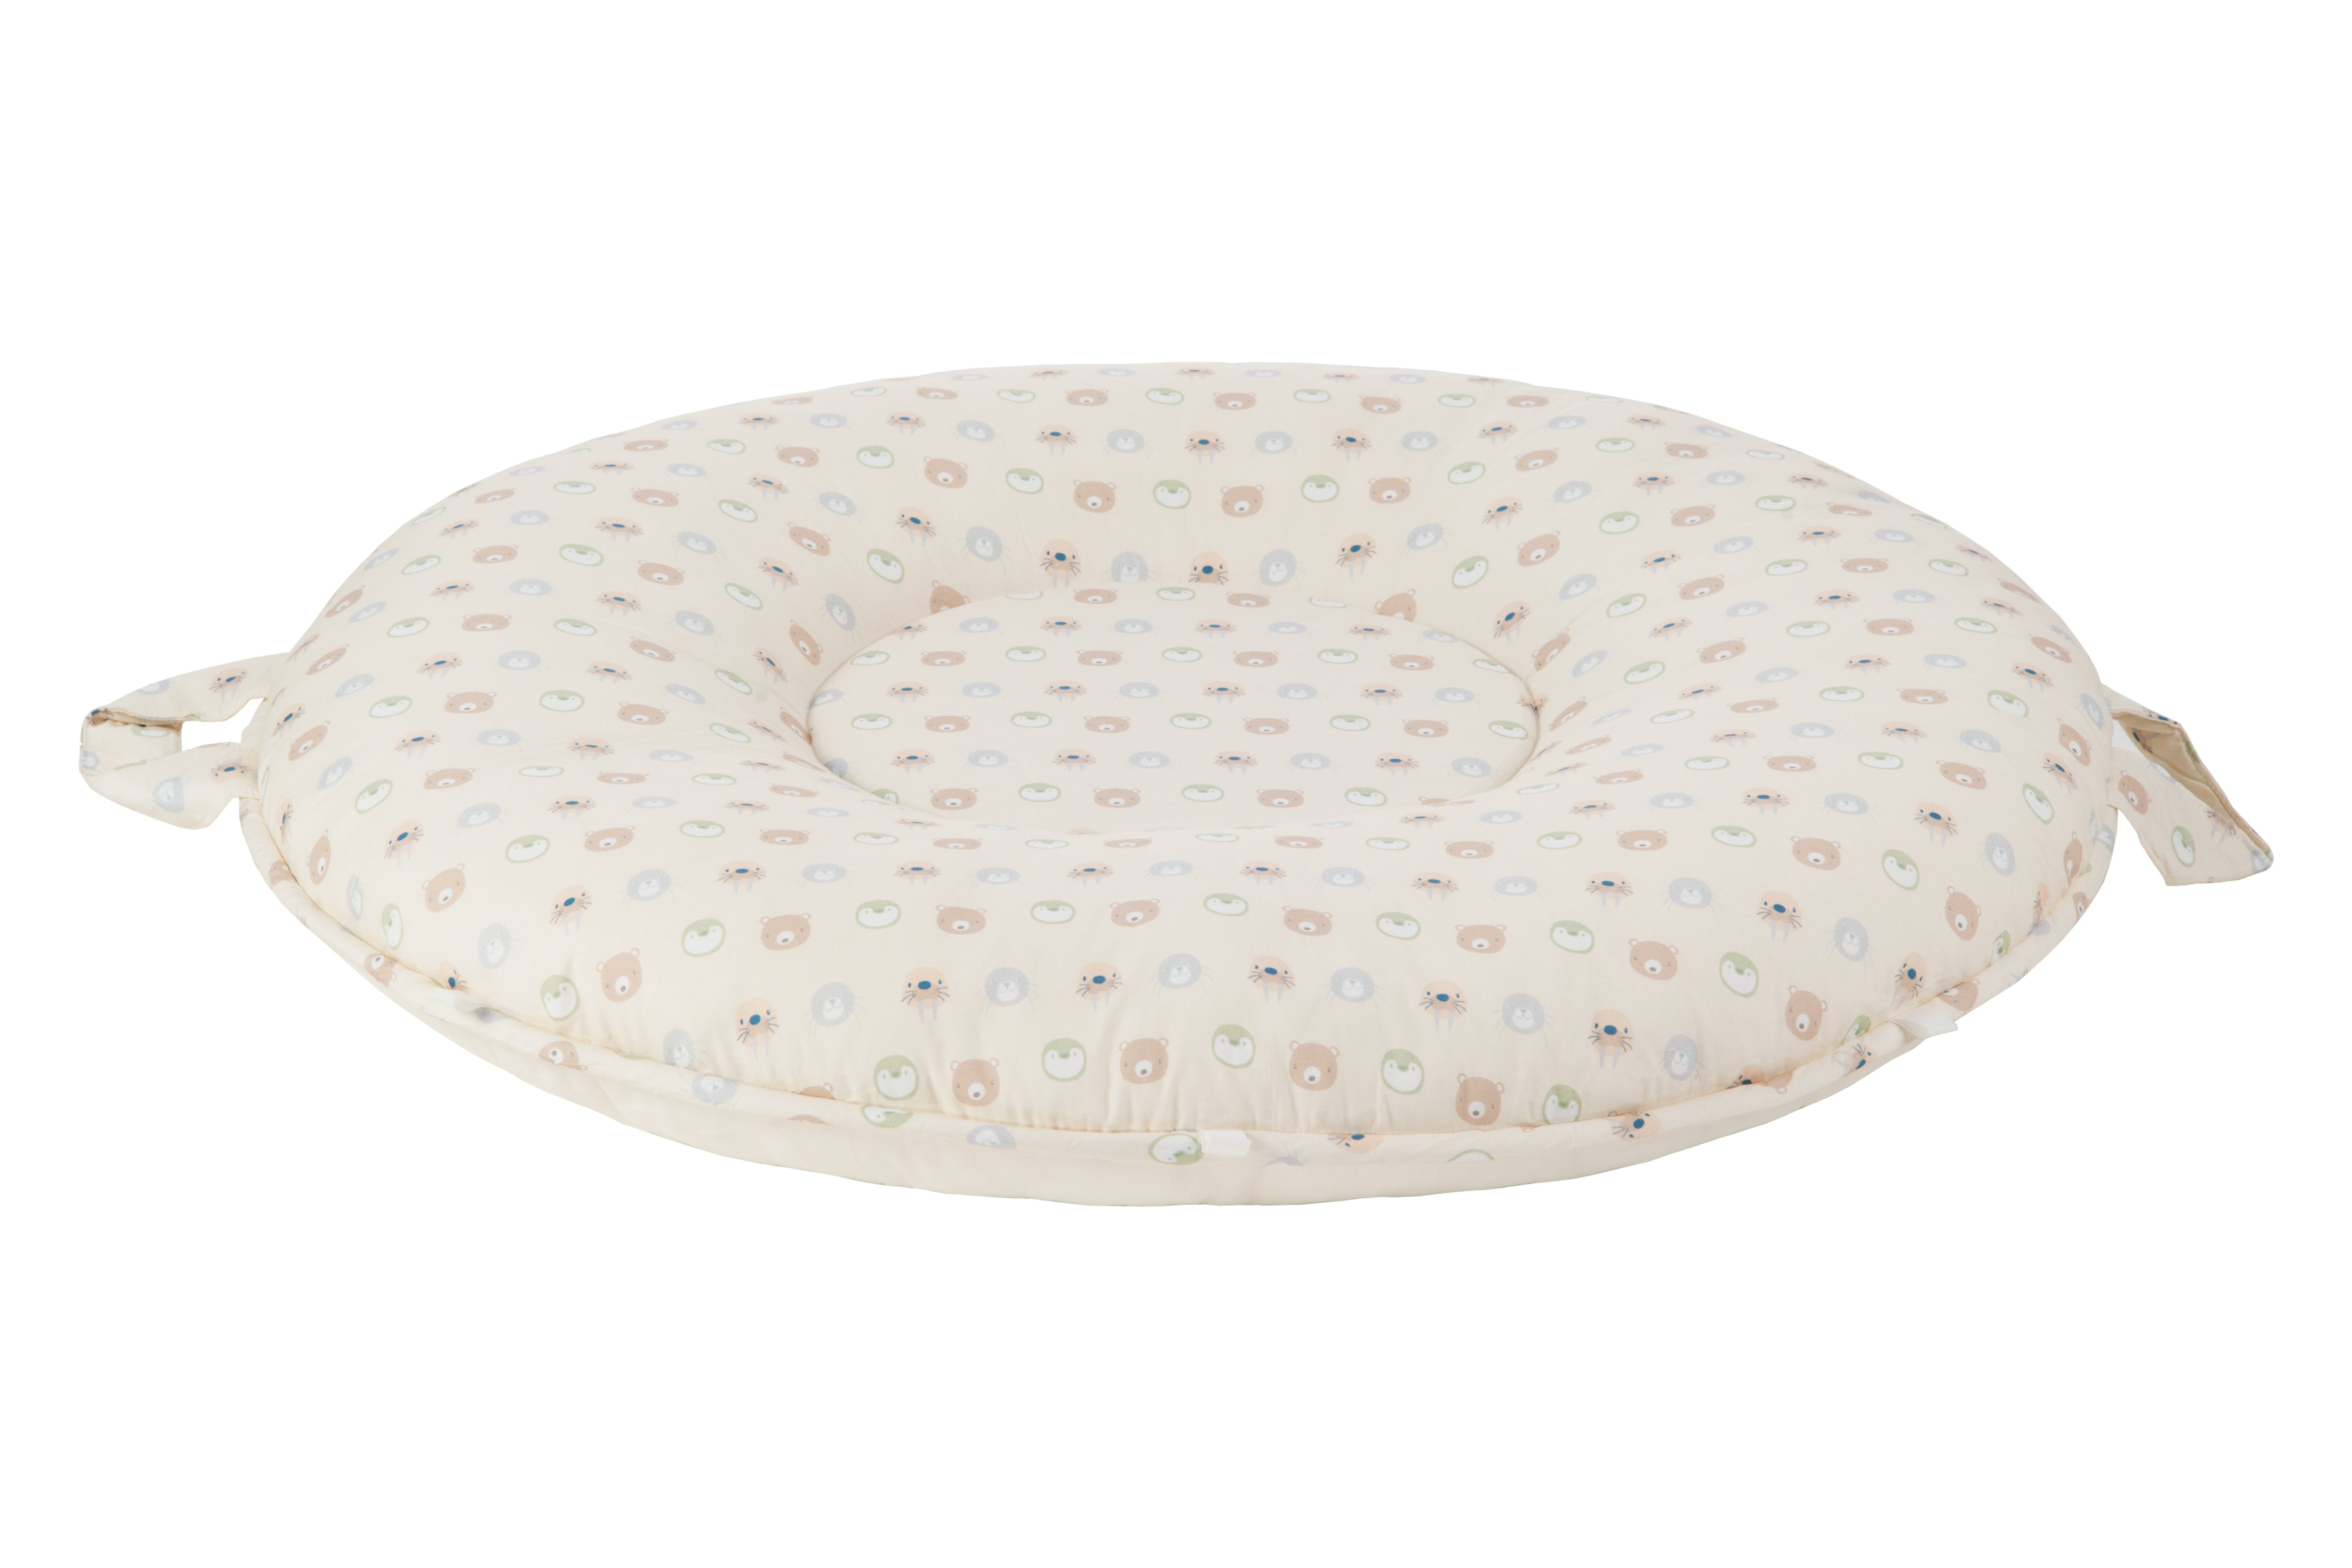 Sealy Children's Floor Cushion - Animal Faces And Beige